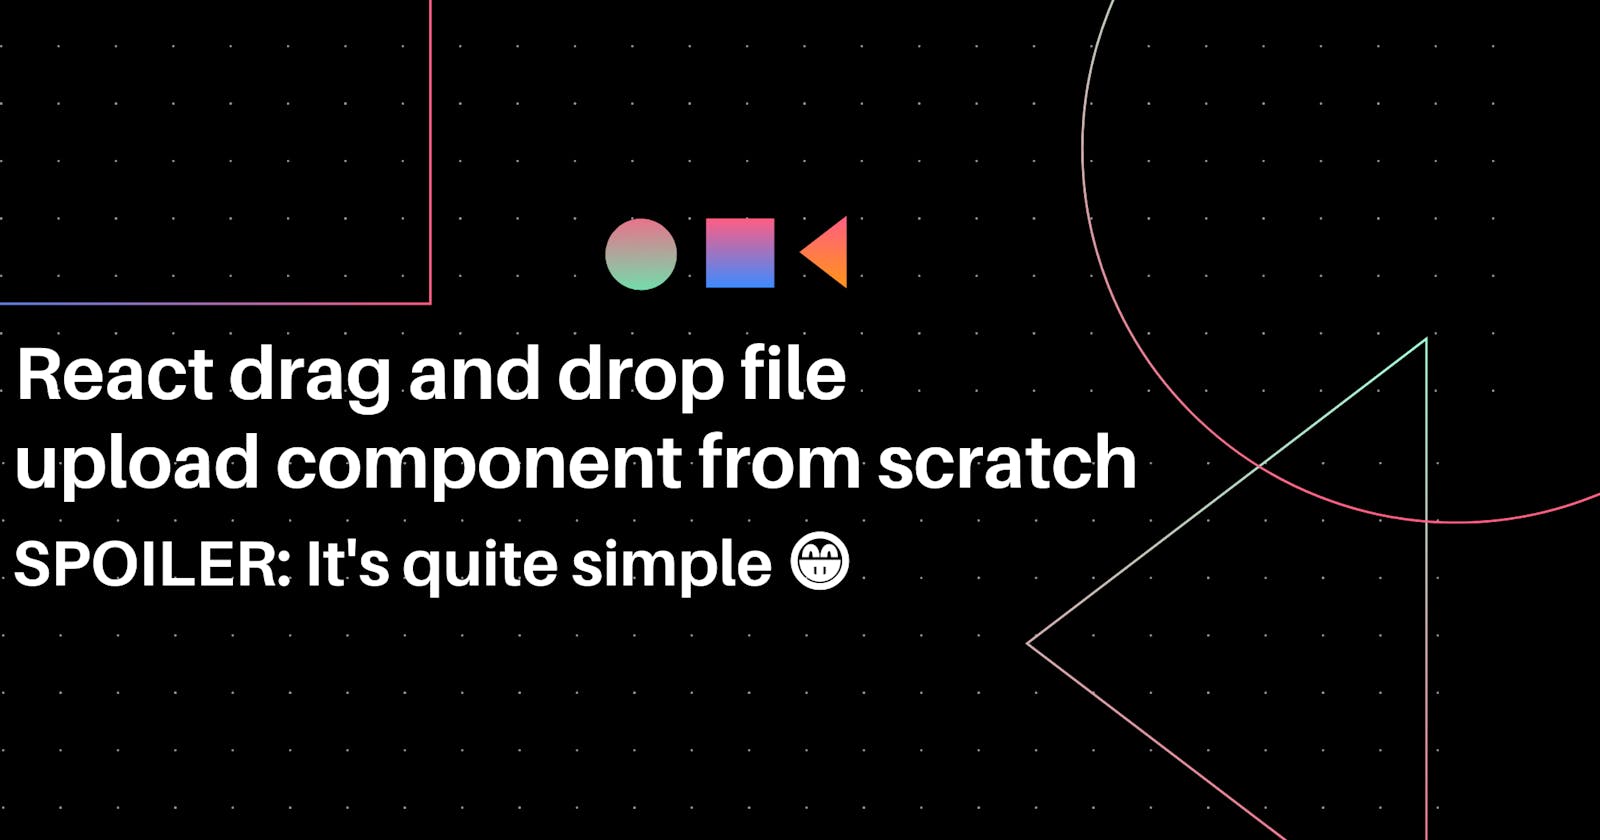 Create a React drag and drop file upload component from scratch 🥊